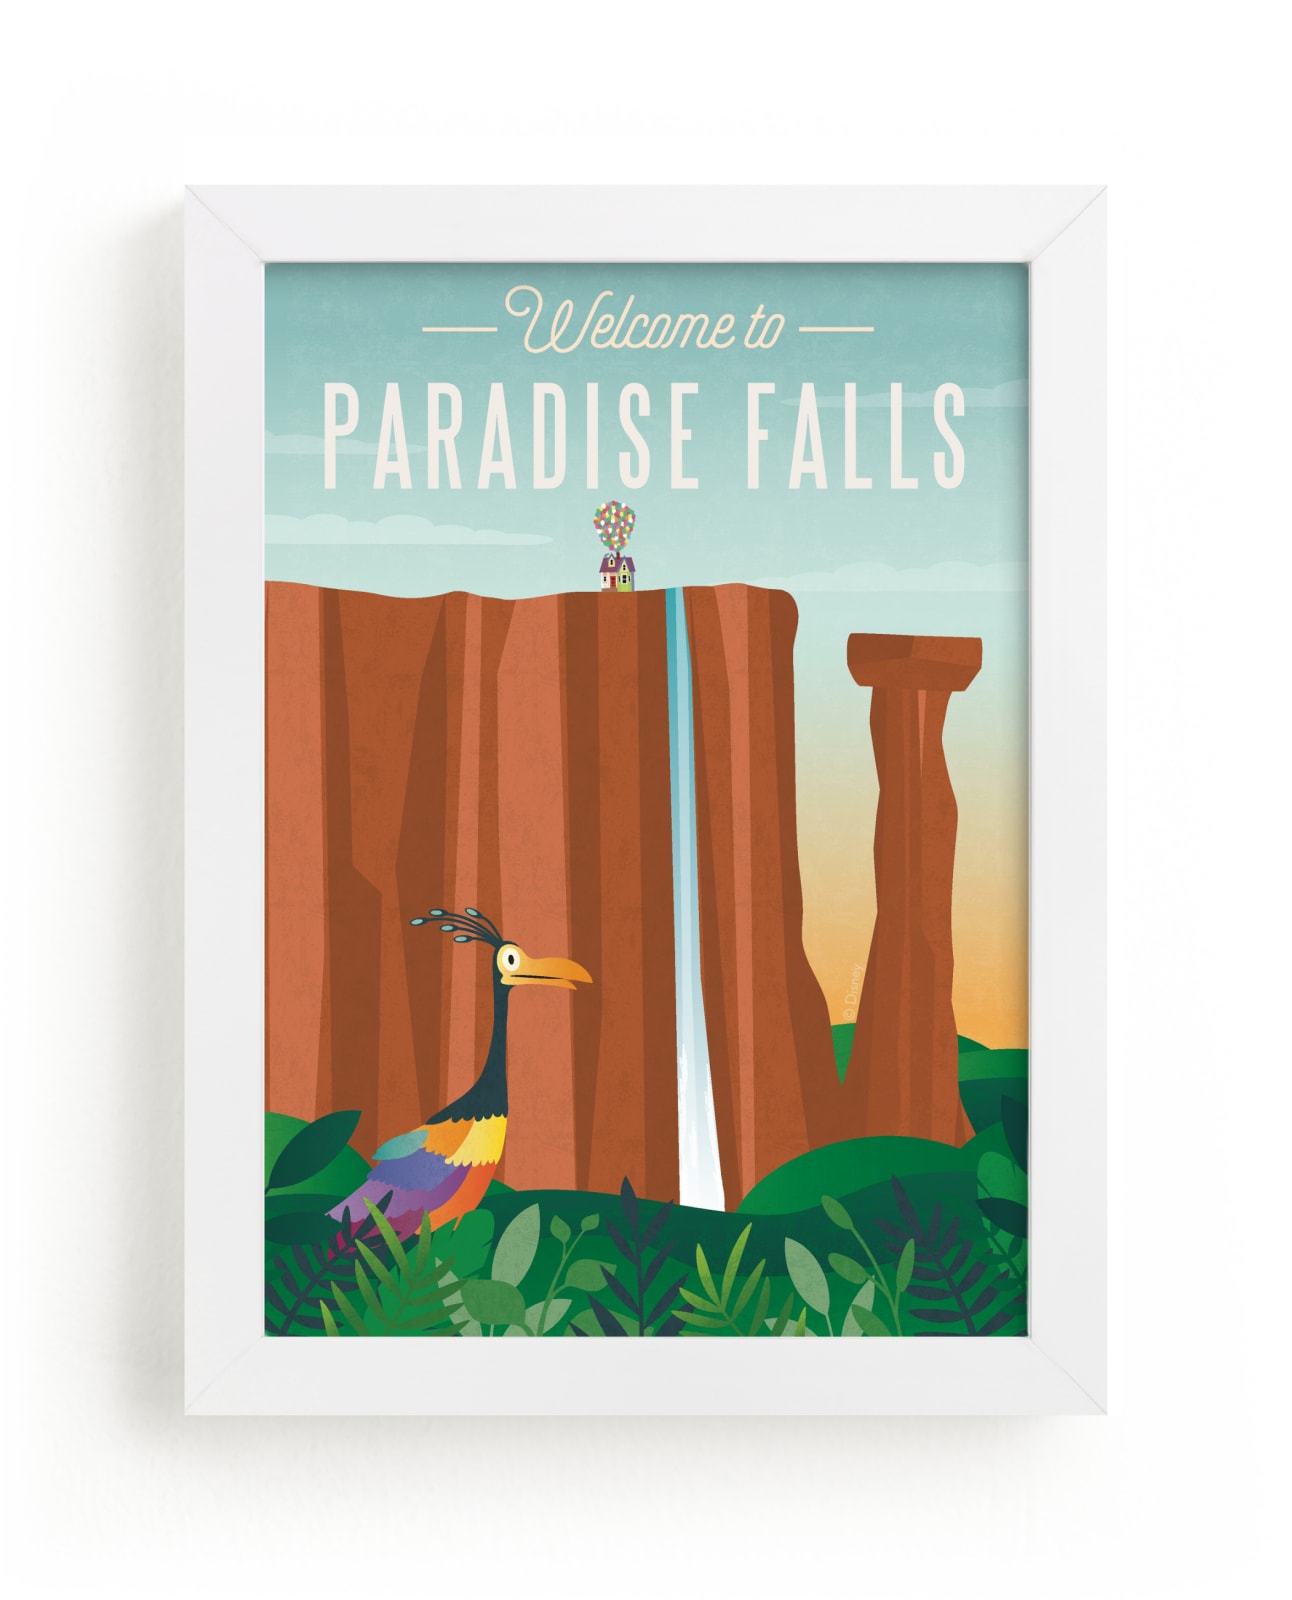 Minted Krystek from Up Erica Prints | and Welcome Disney Disney Art to by Pixar\'s Falls Paradise